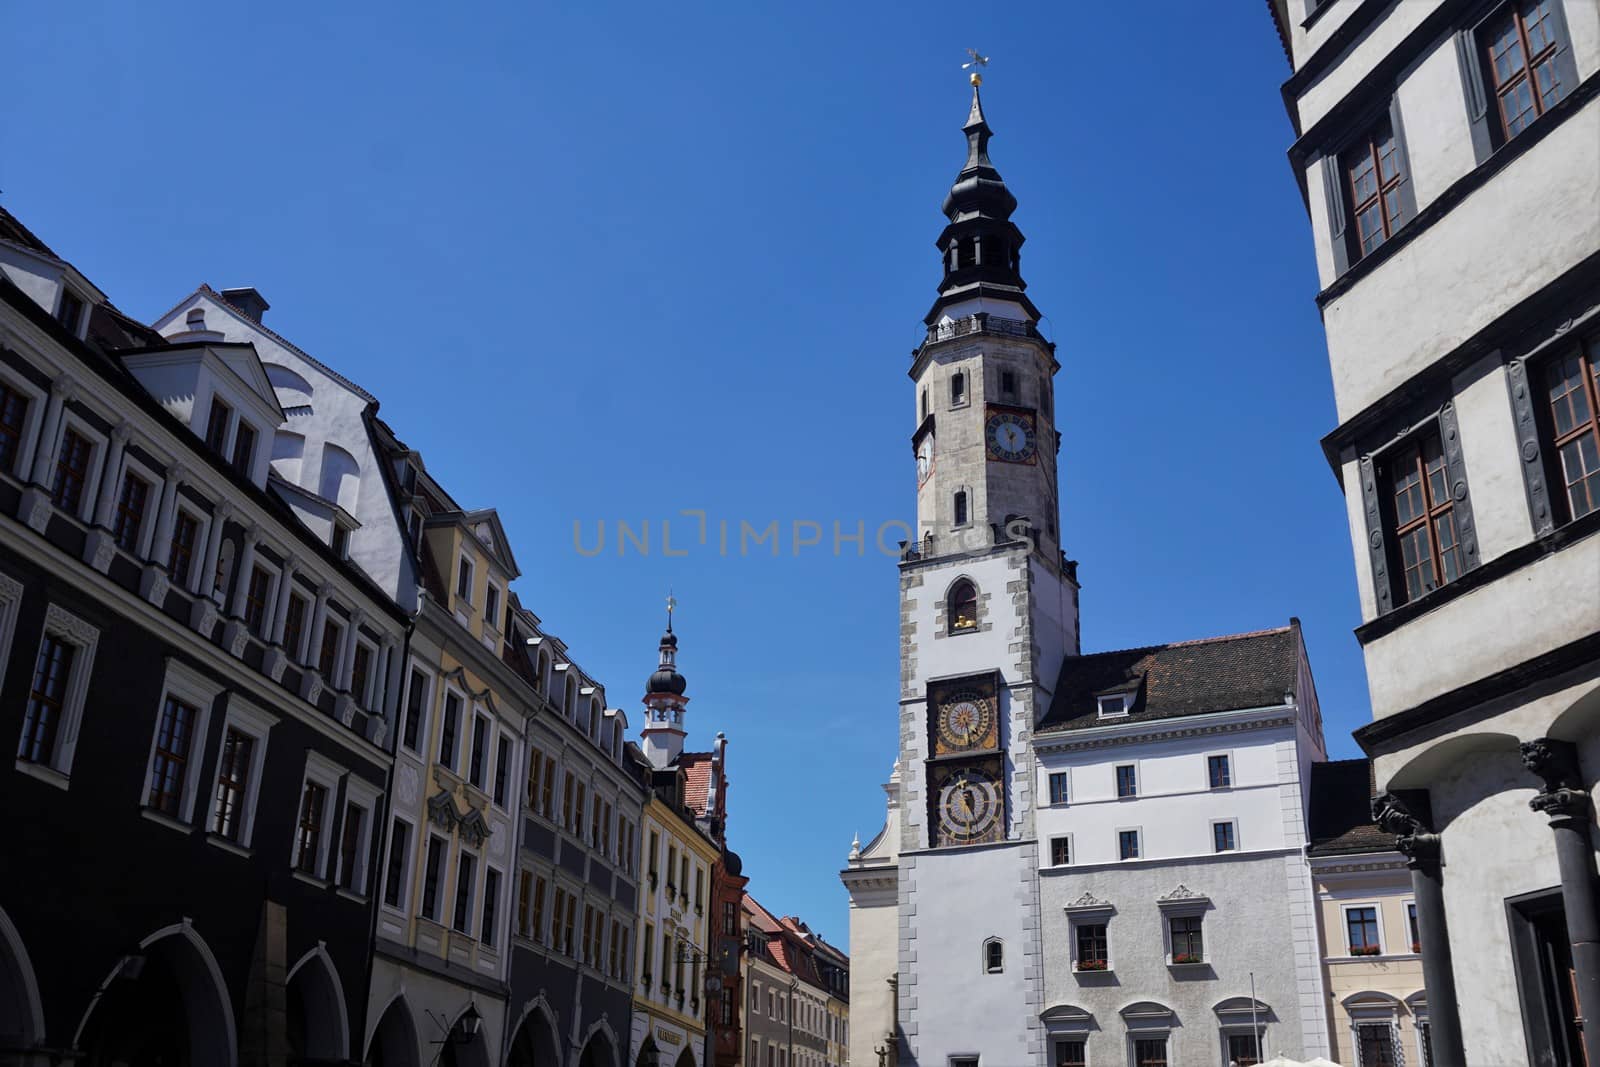 The Old Town Hall with the moon phase clock and restaurated houses by pisces2386